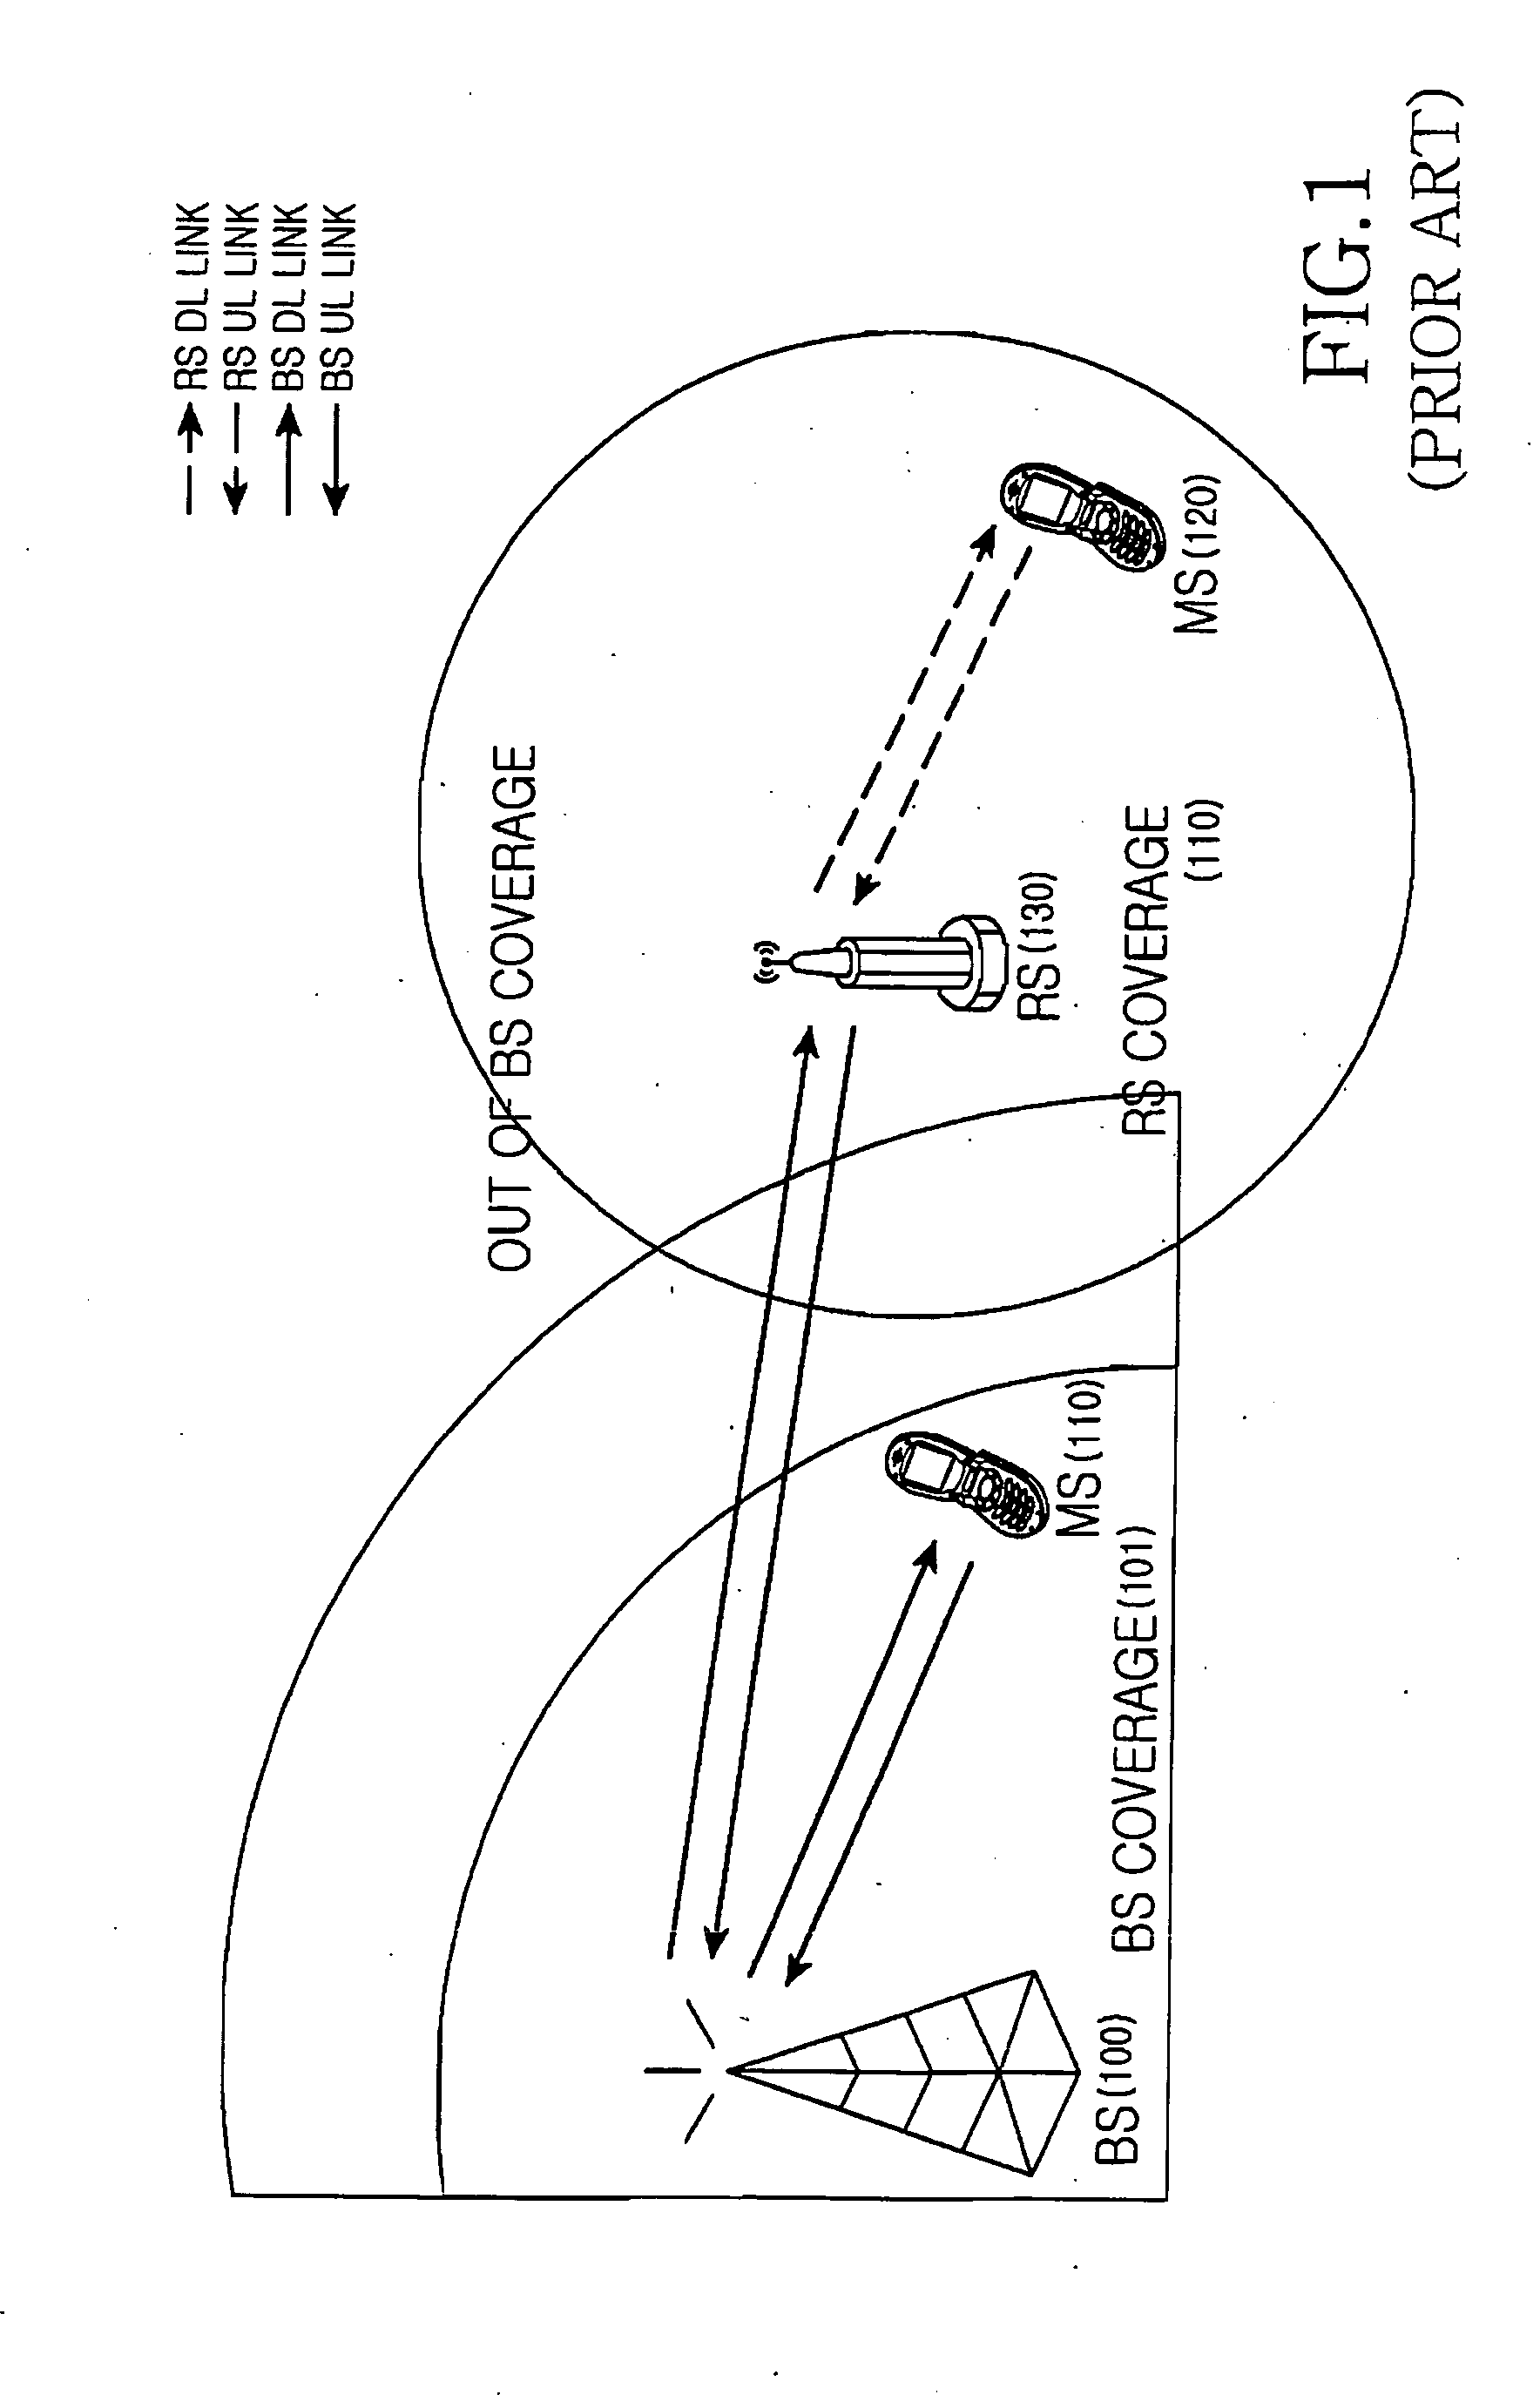 Apparatus and method for supporting multiple links in a network using frequency bands